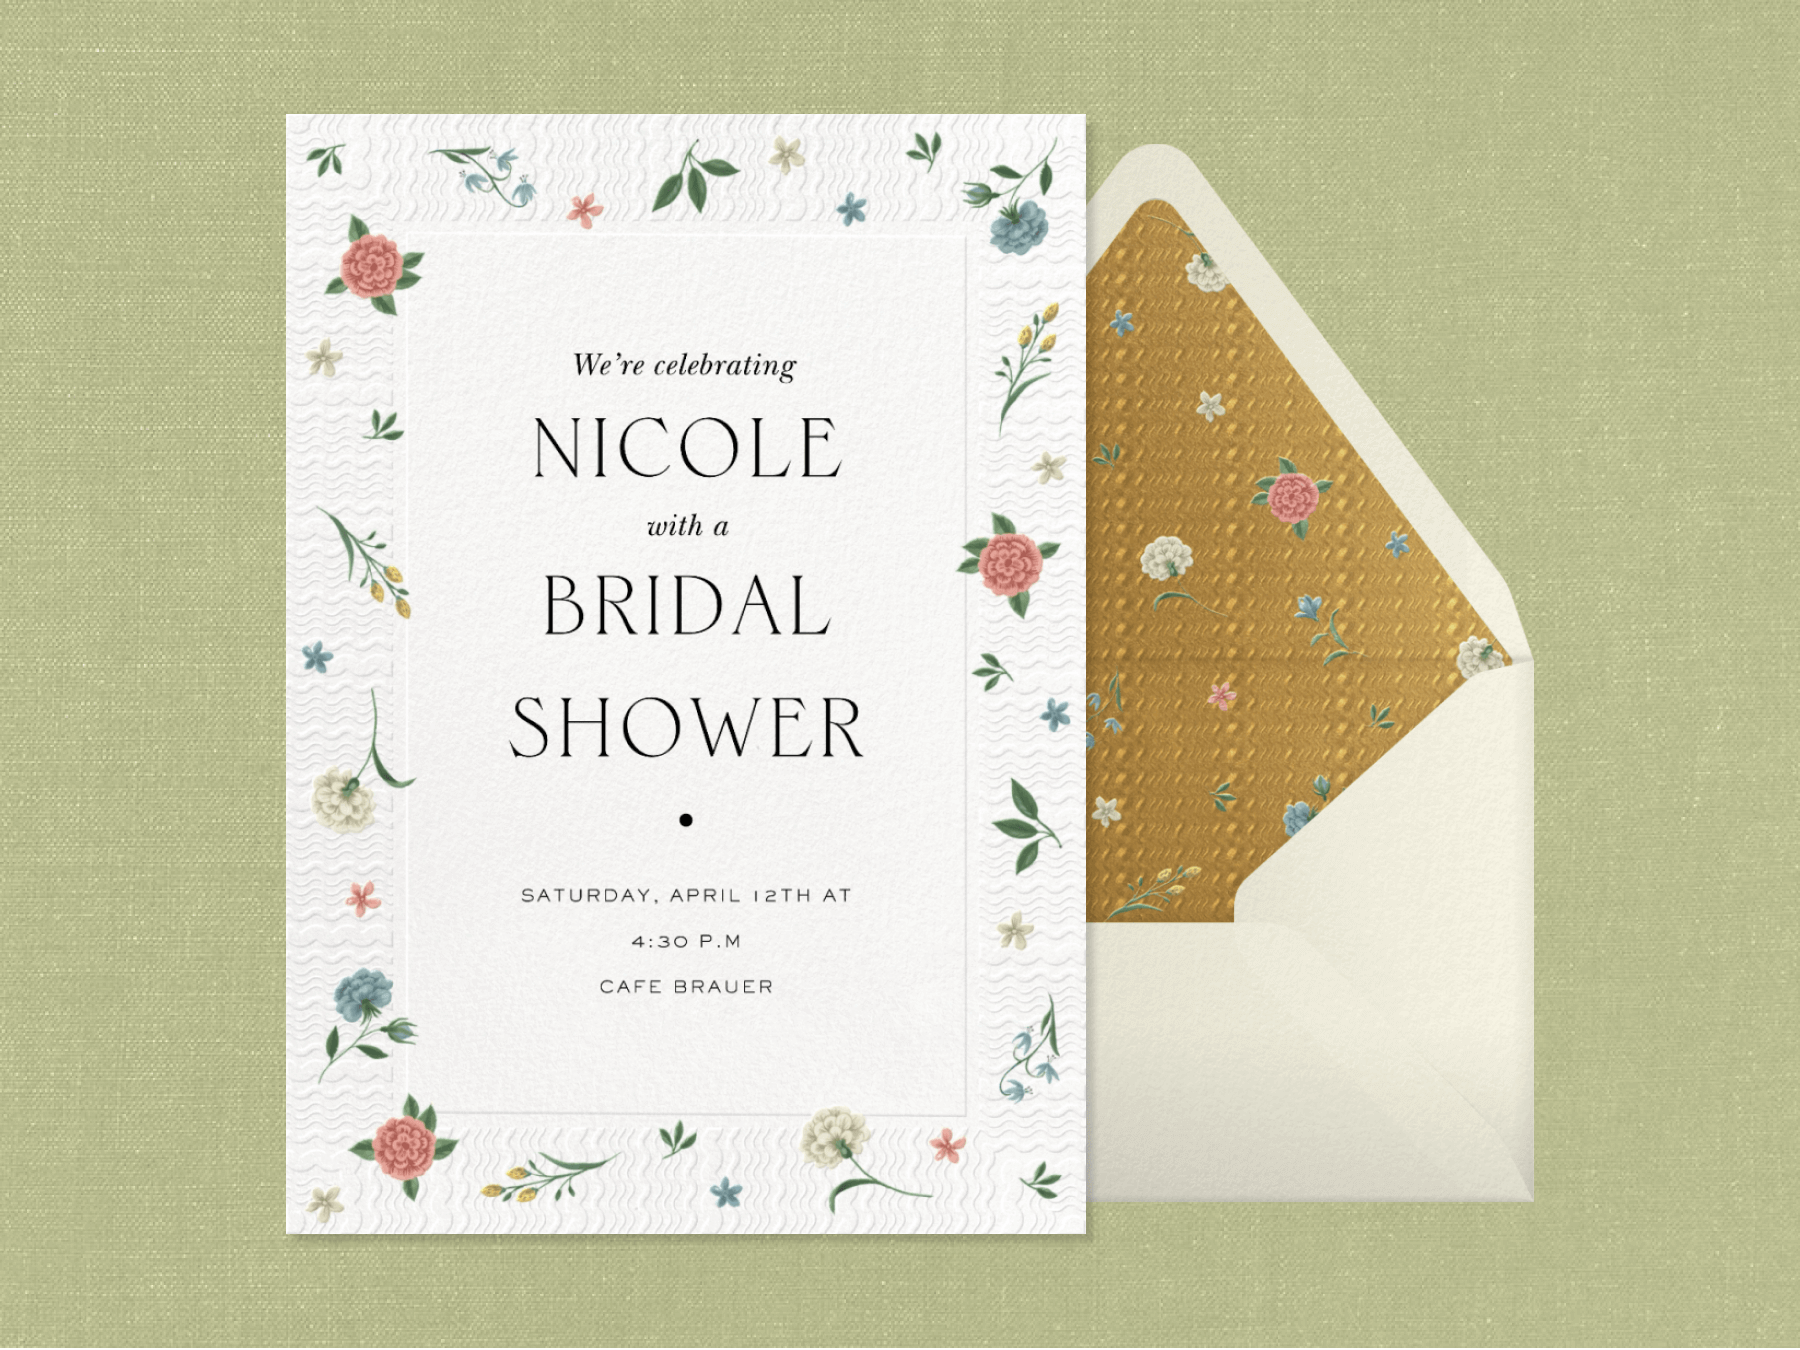 A bridal shower invitation with a textured border and small blue, pink, and white roses sprinkled, beside a white envelope with gold and floral liner.